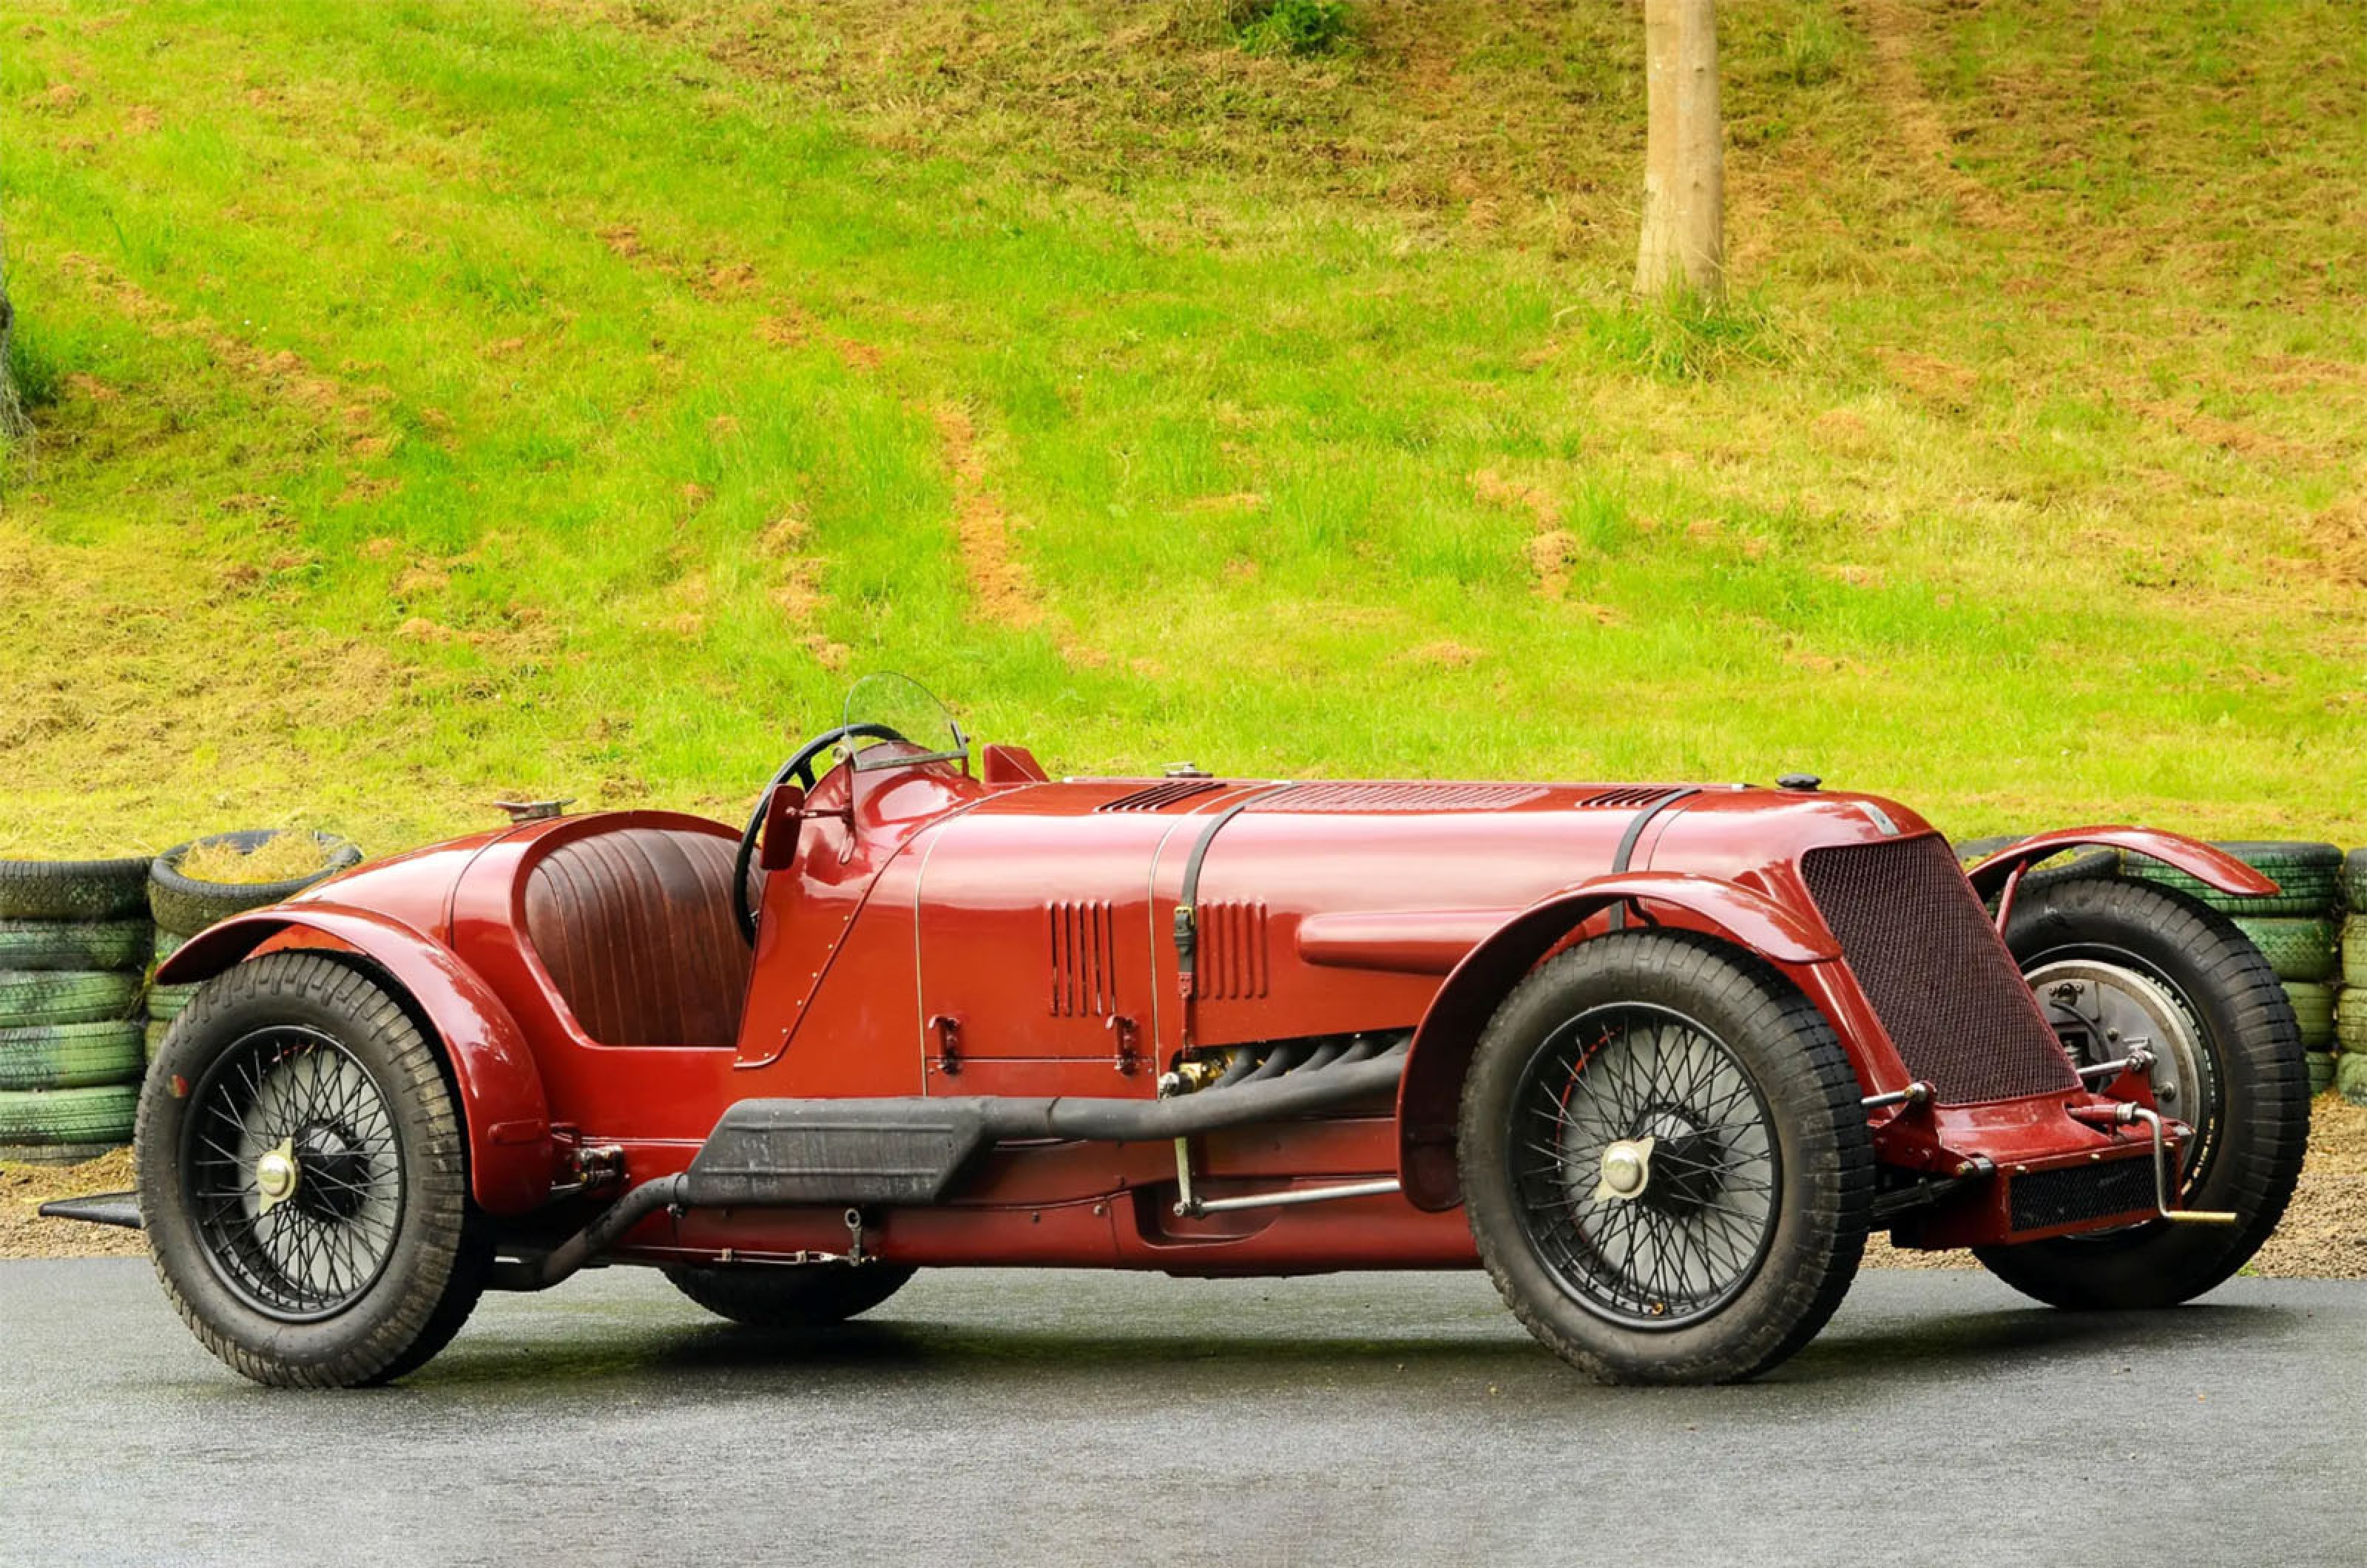 <p>Alfa Romeo was one of the car makers to experiment with 16-cylinder engines, trialling the first such unit in its Tipo V4 racing car.</p>  <p>Comprising two eight-cylinder 26B engines working off a common crankshaft, each bank was supercharged, generating a total output of 305bhp from the 4-litre unit.</p>  <p>Performance was impressive by the standards of the day, the Tipo V4 achieving a top speed of more than 160mph.</p>